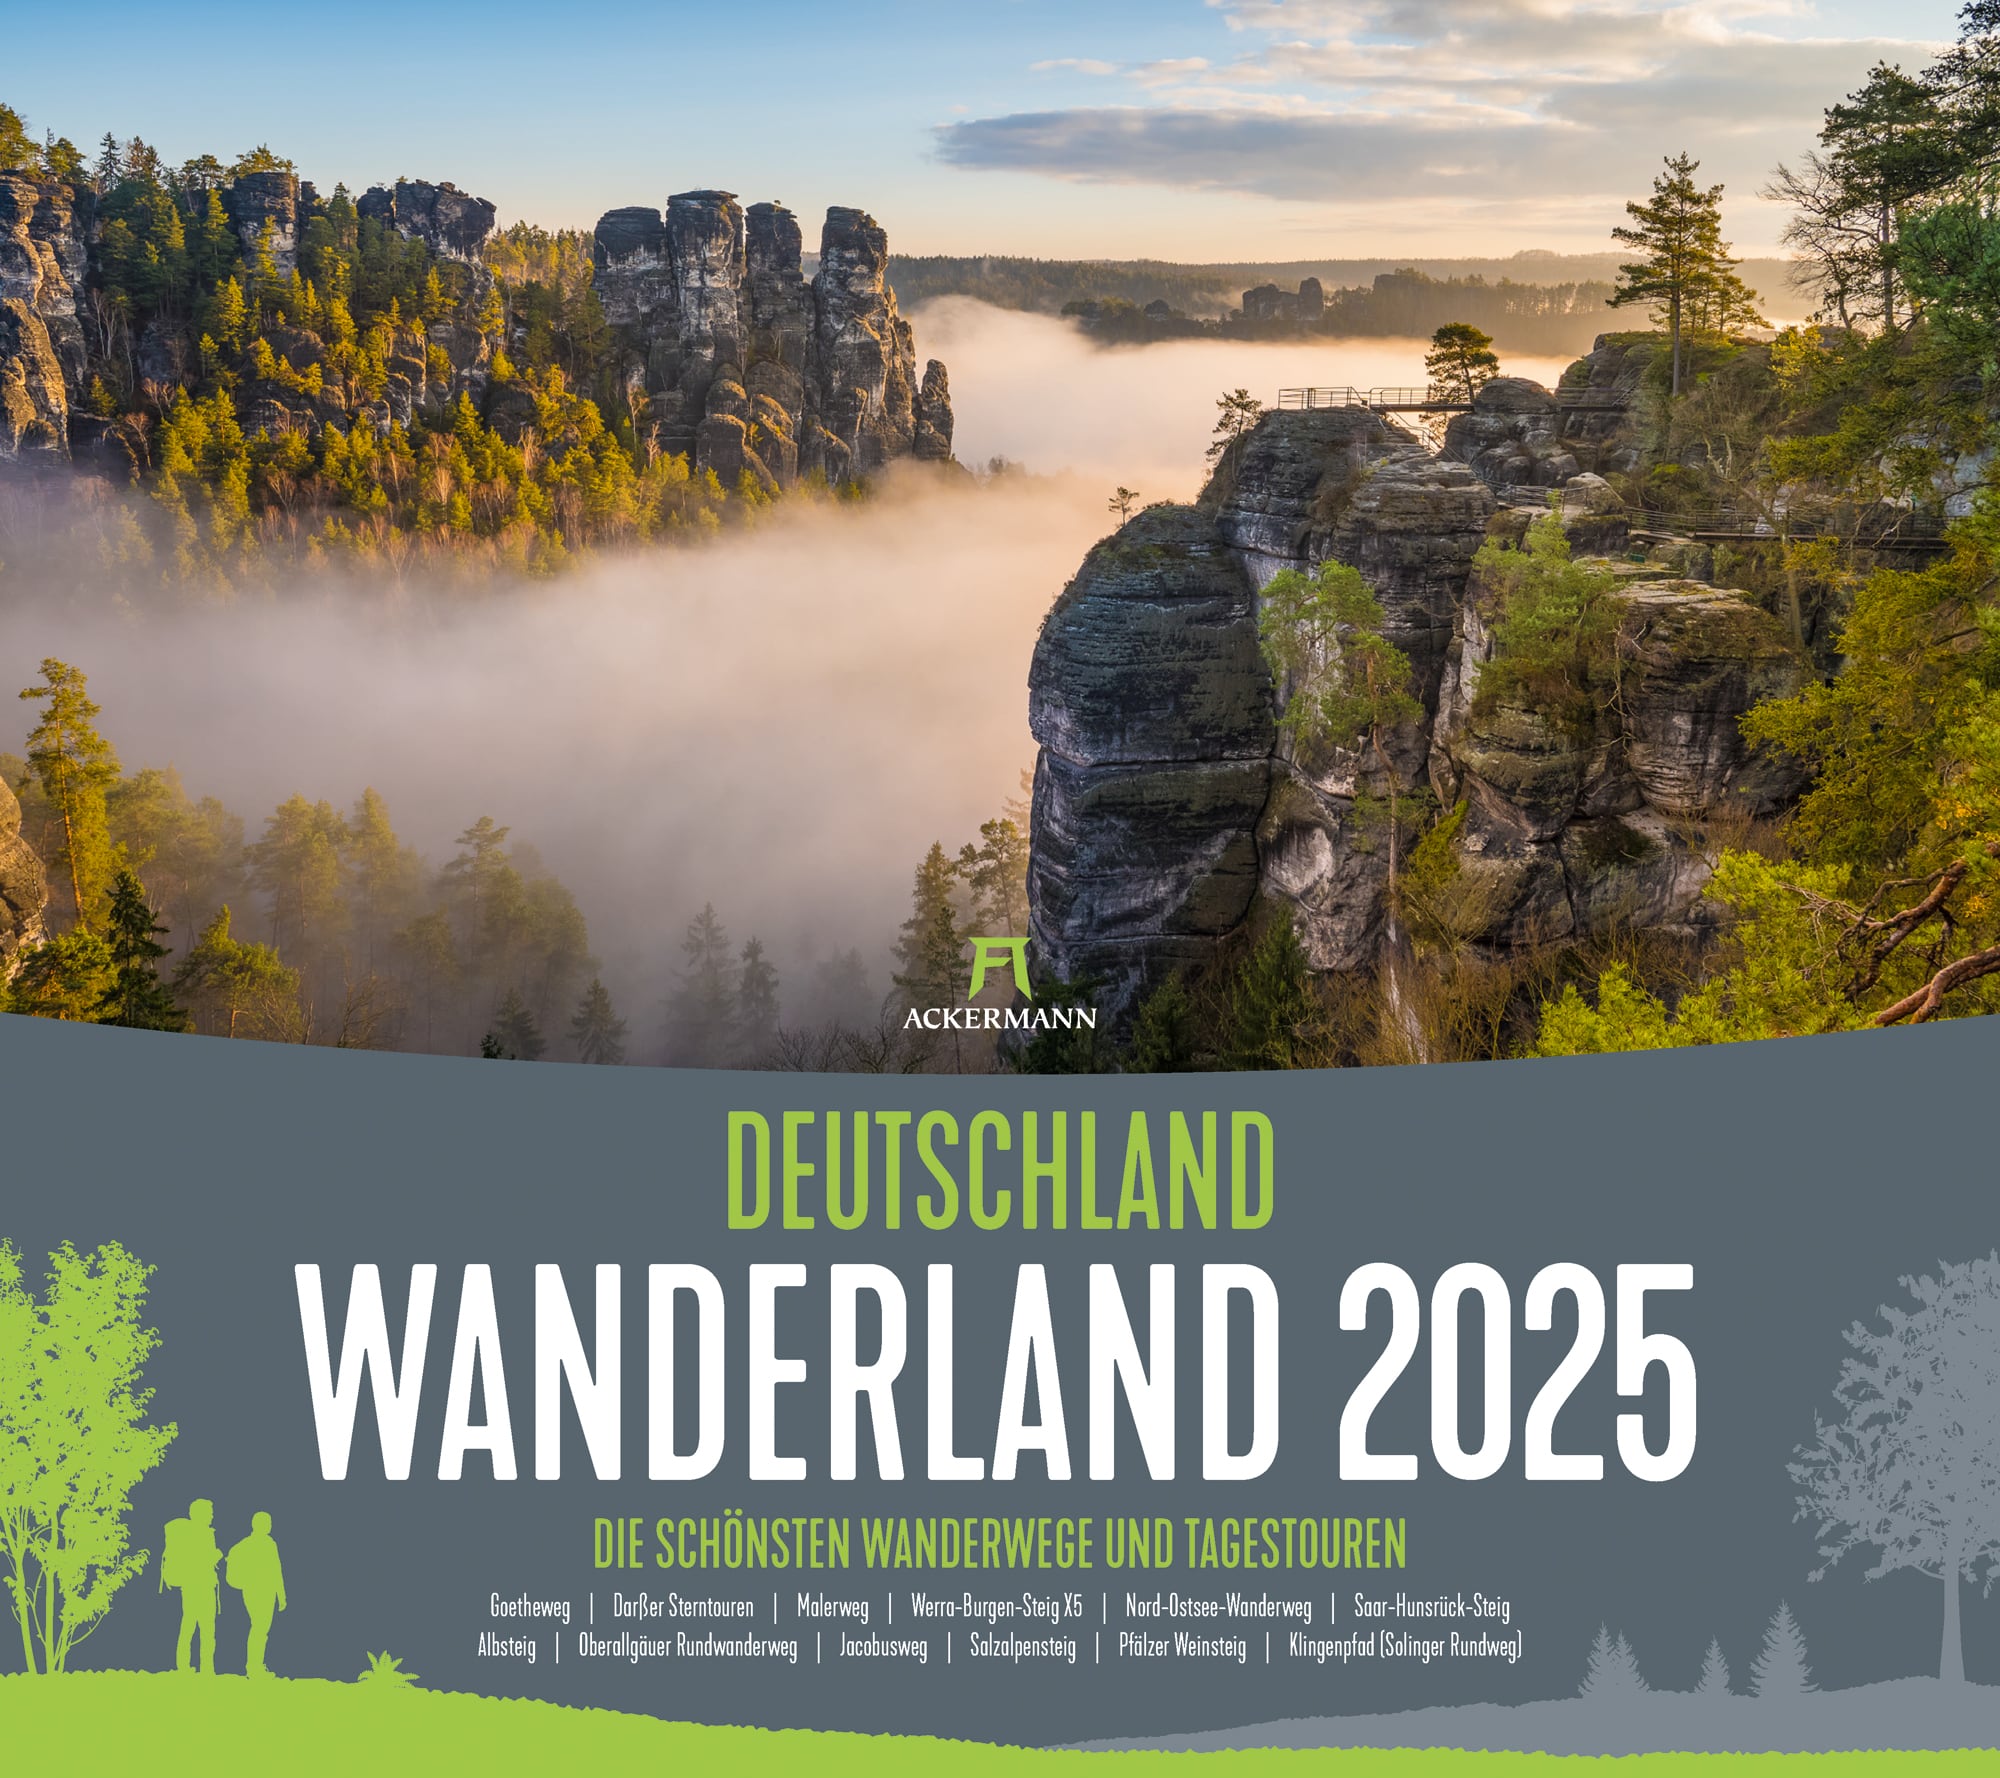 Ackermann Calendar Hiking Trails of Germany 2025 - Cover Page